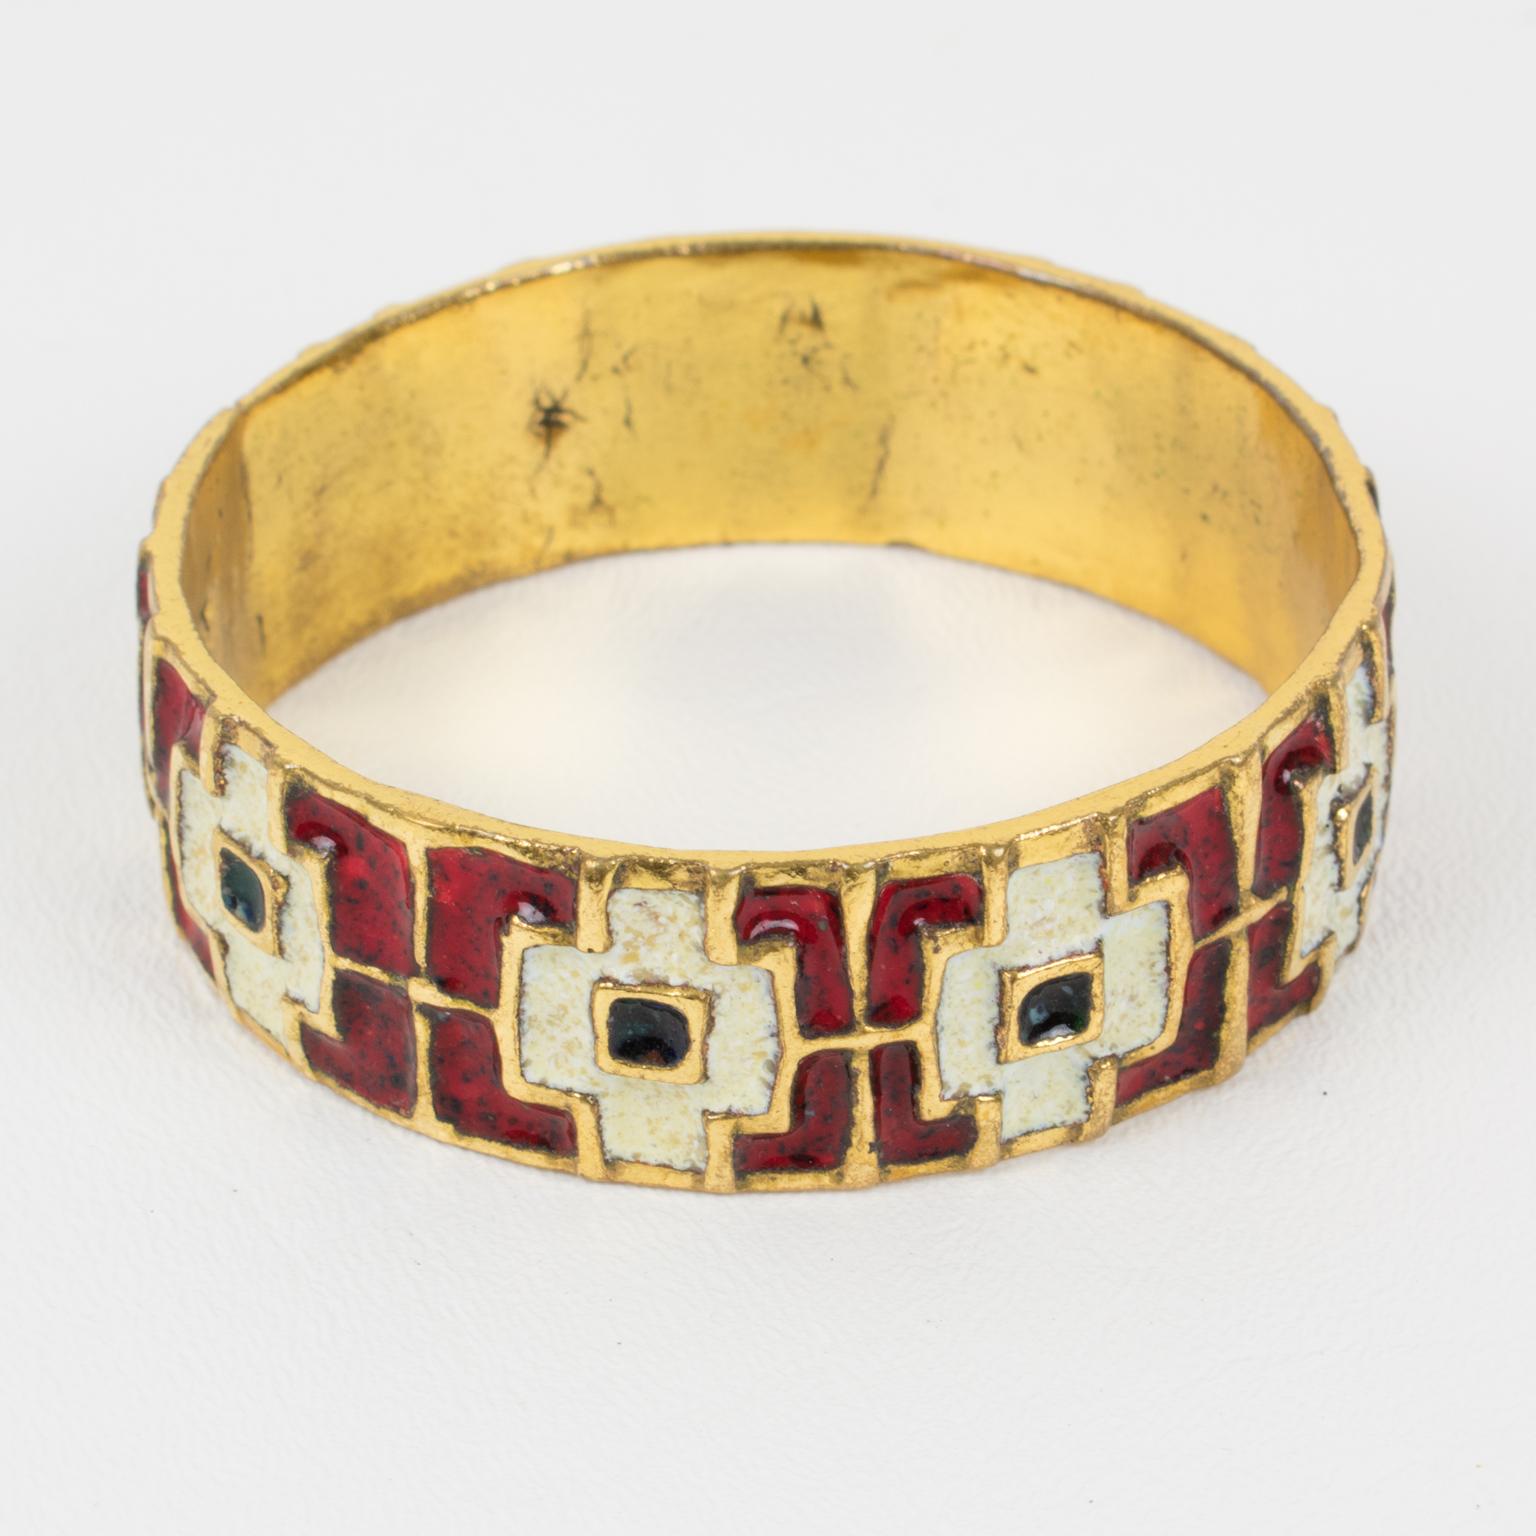 This lovely modernist bronze bracelet bangle was made in France in the 1960s. 
A large gilt bronze band topped with a geometric design ornate with red, white, and black-green enameling. There is no visible maker's mark.
Measurements: Inside across